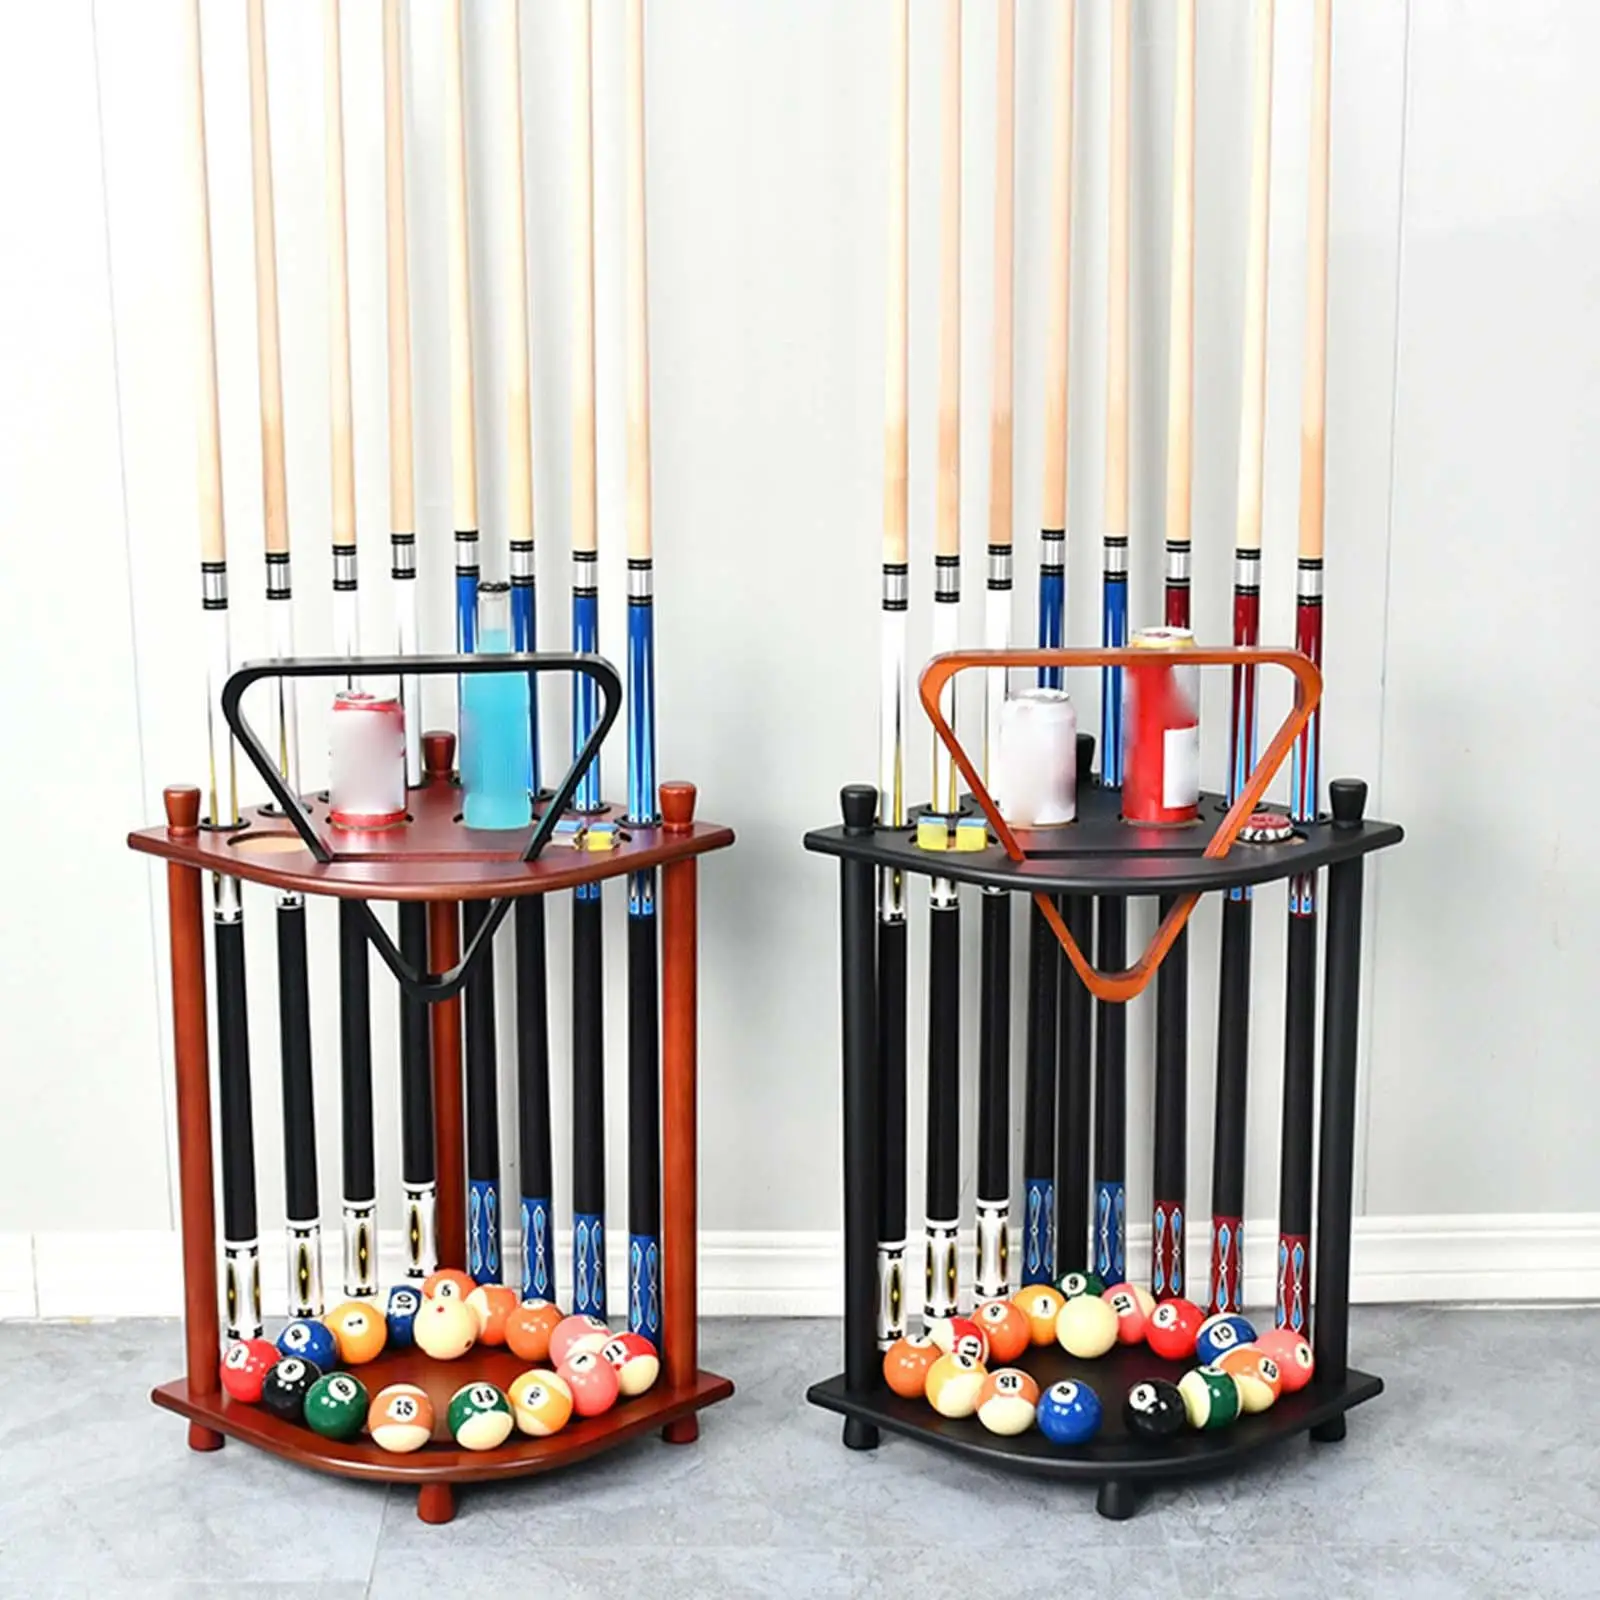 Billiards Pool Rack fors and Balls - Holds 8 Sticks, Free Standing